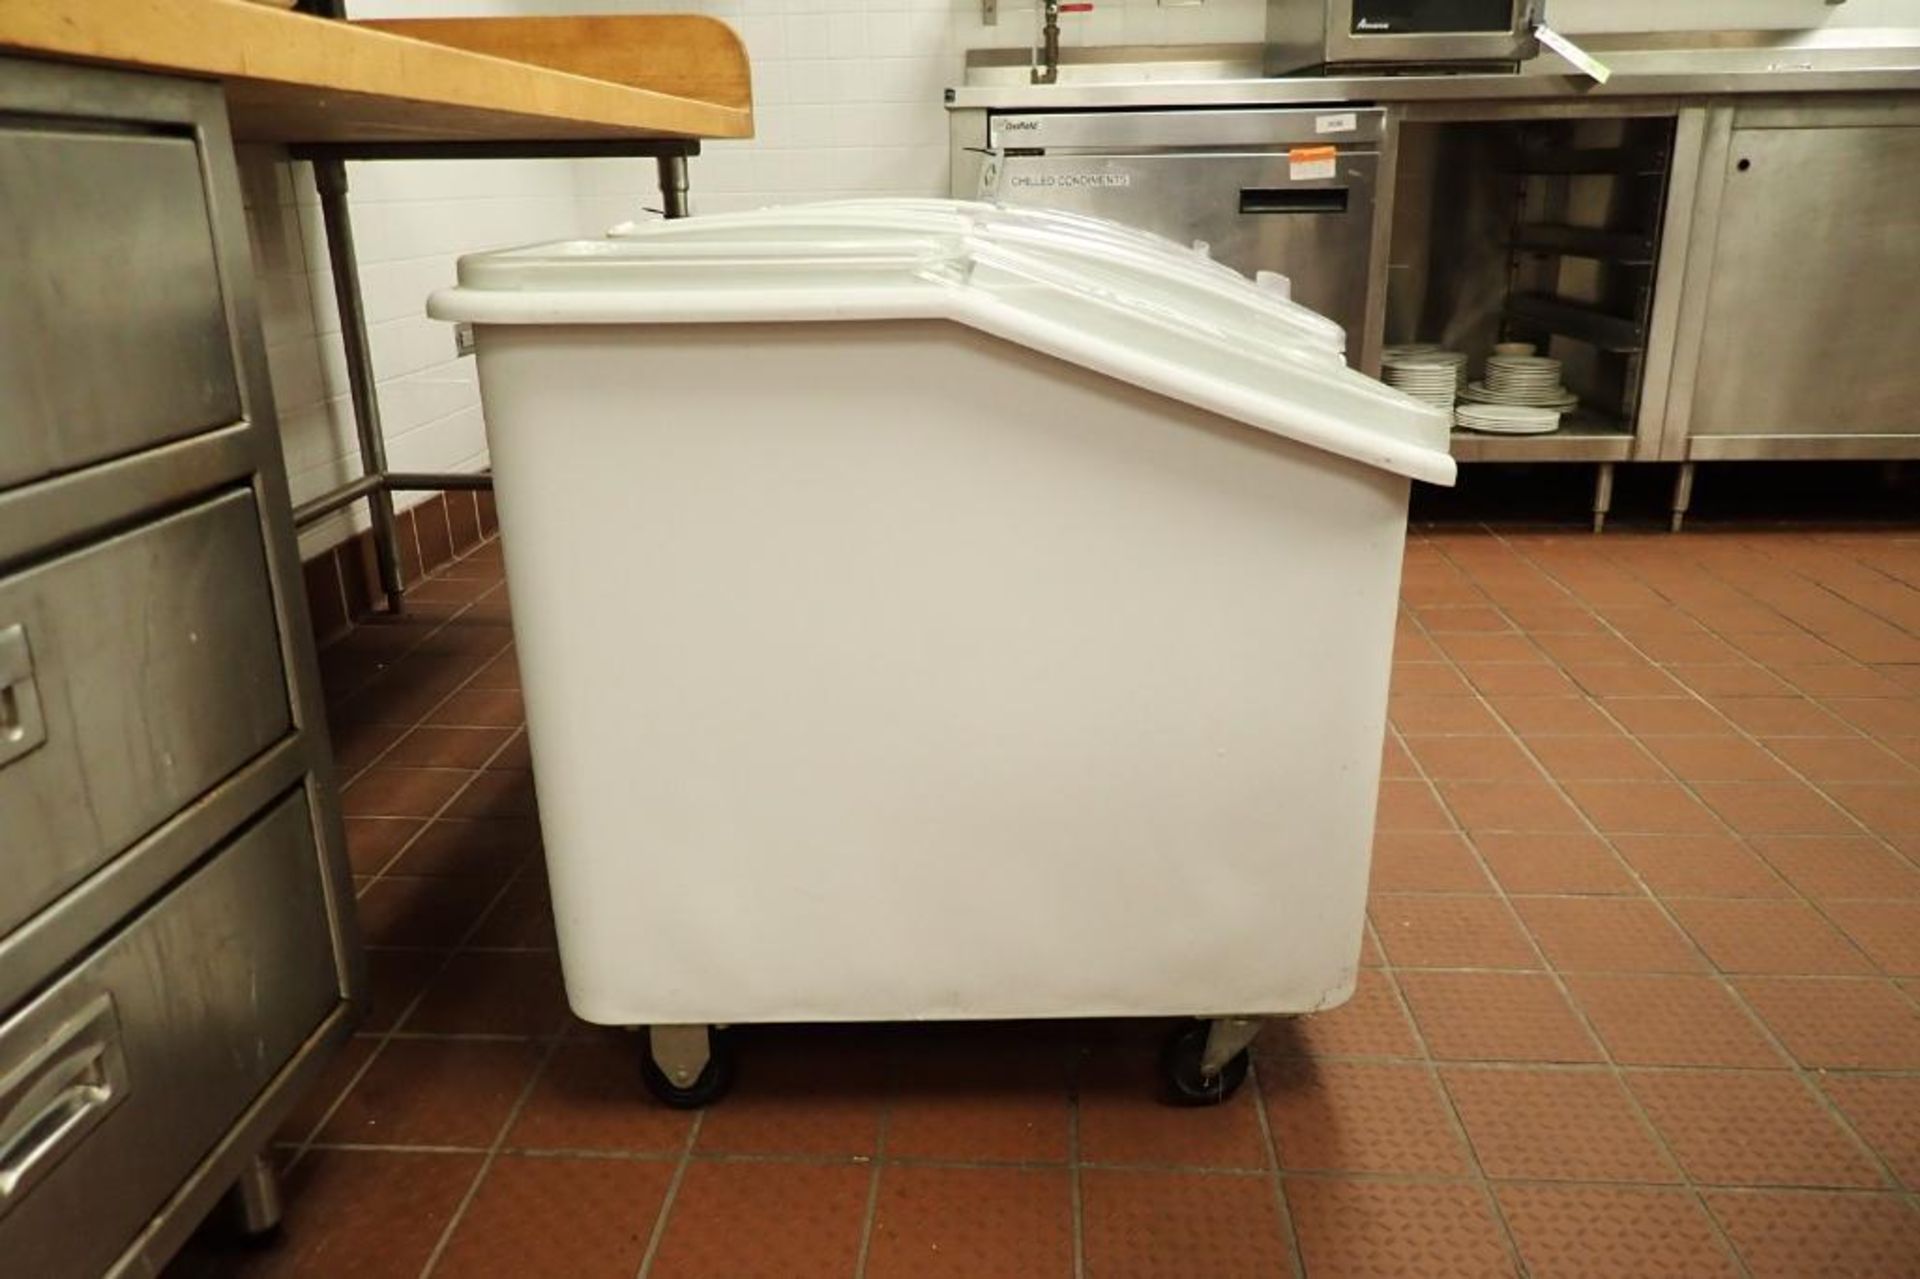 Rubbermaid plastic ingredient bins, 30 in. long x 15 in. wide x 28 in. tall, on casters - Image 3 of 4